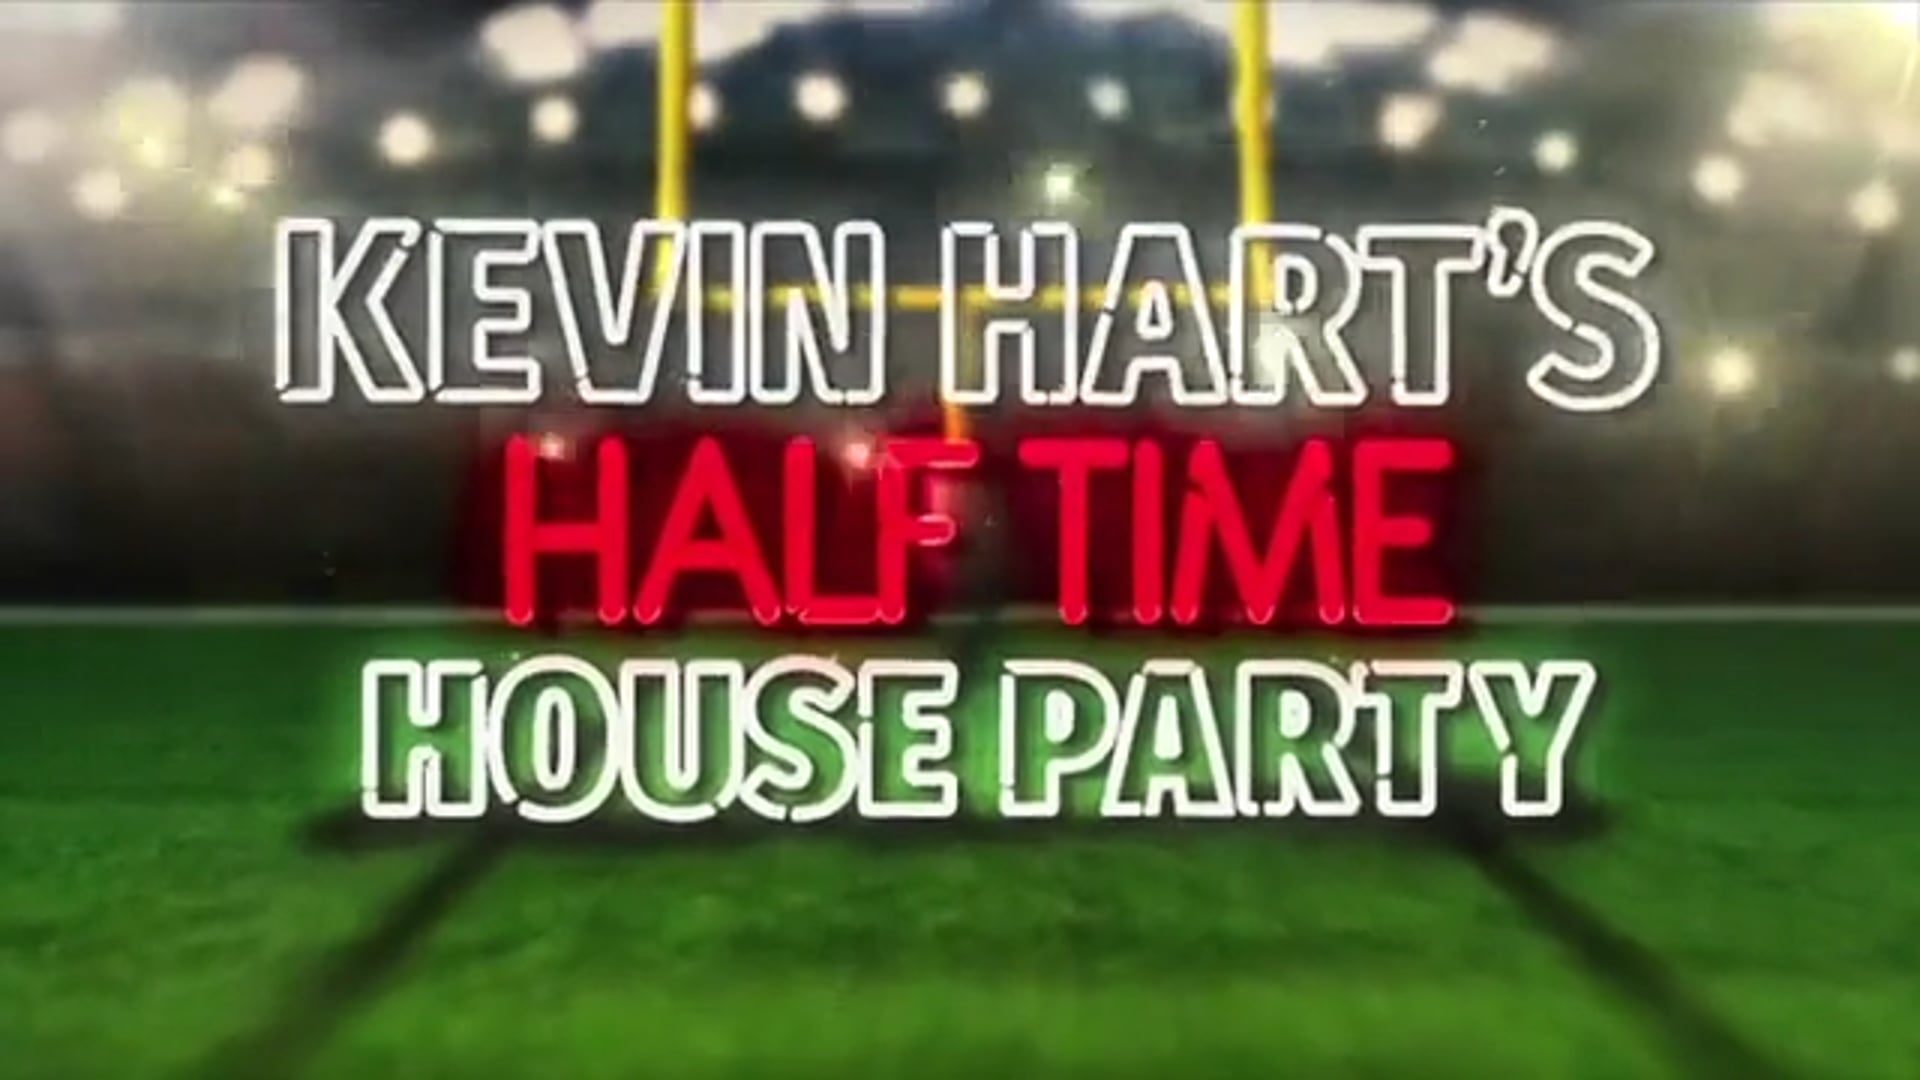 Kevin Hart's 'Halftime House Party'